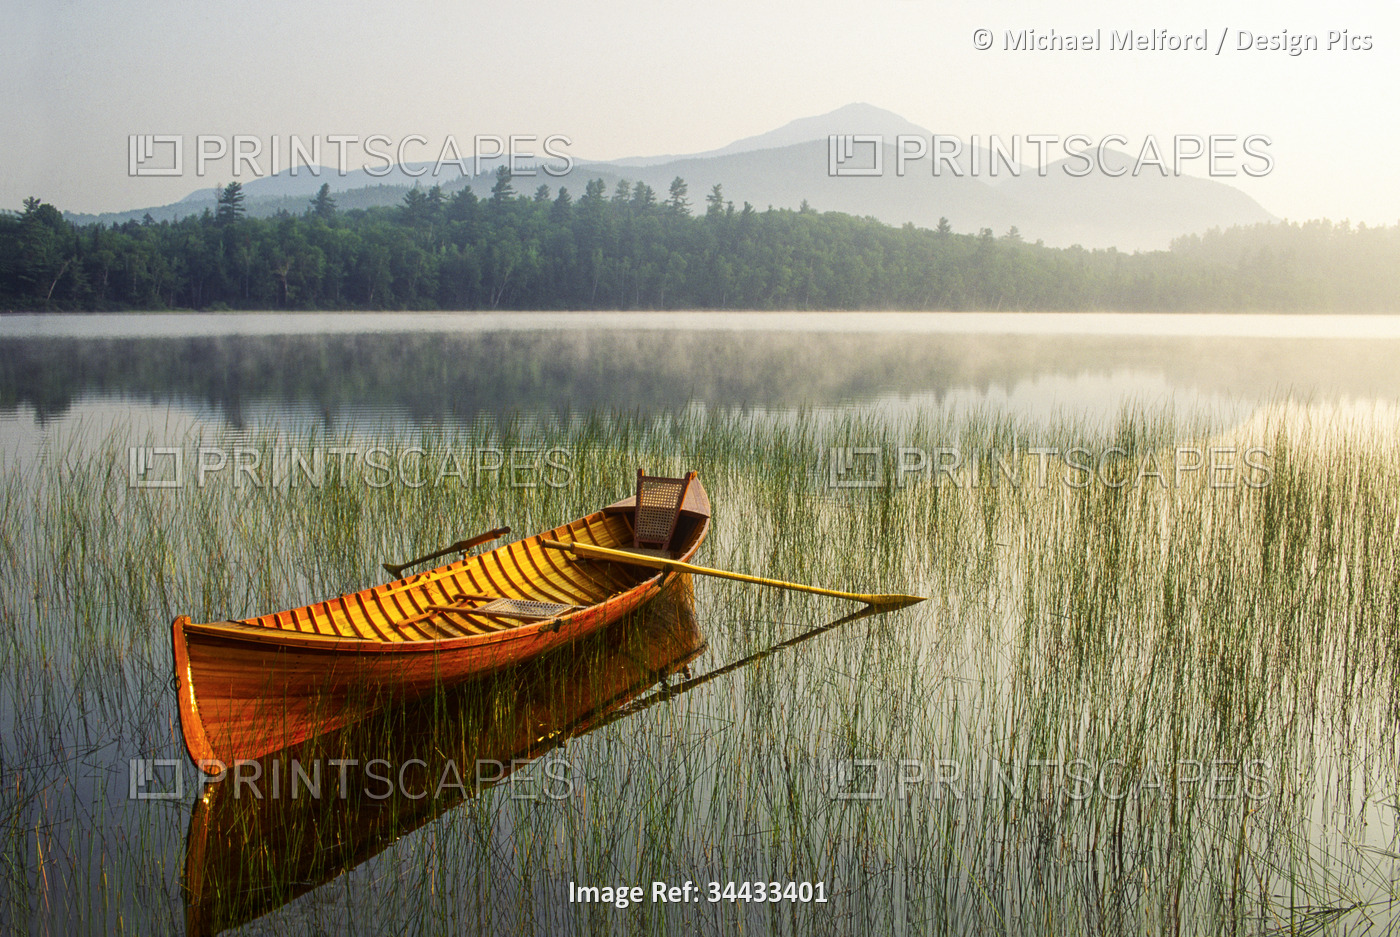 Adirondack Guide Boat in a calm lake with Whiteface Mountain in the background, ...